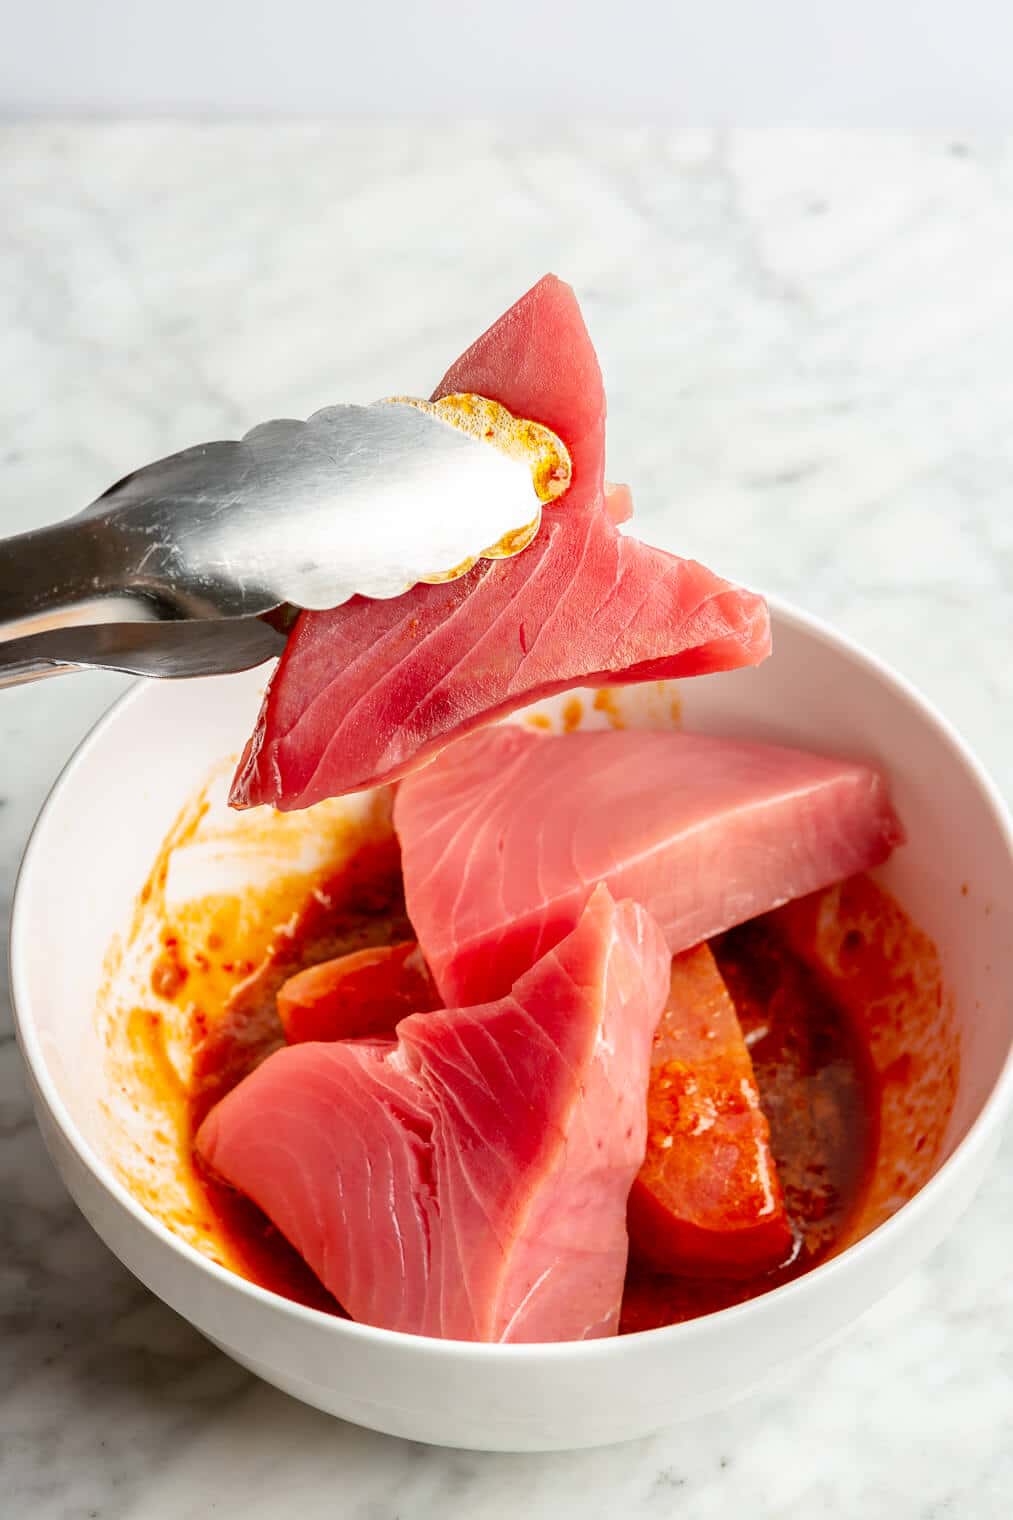 A pair of tongs holding up a tuna steak over a white bowl with chili-lime marinade.